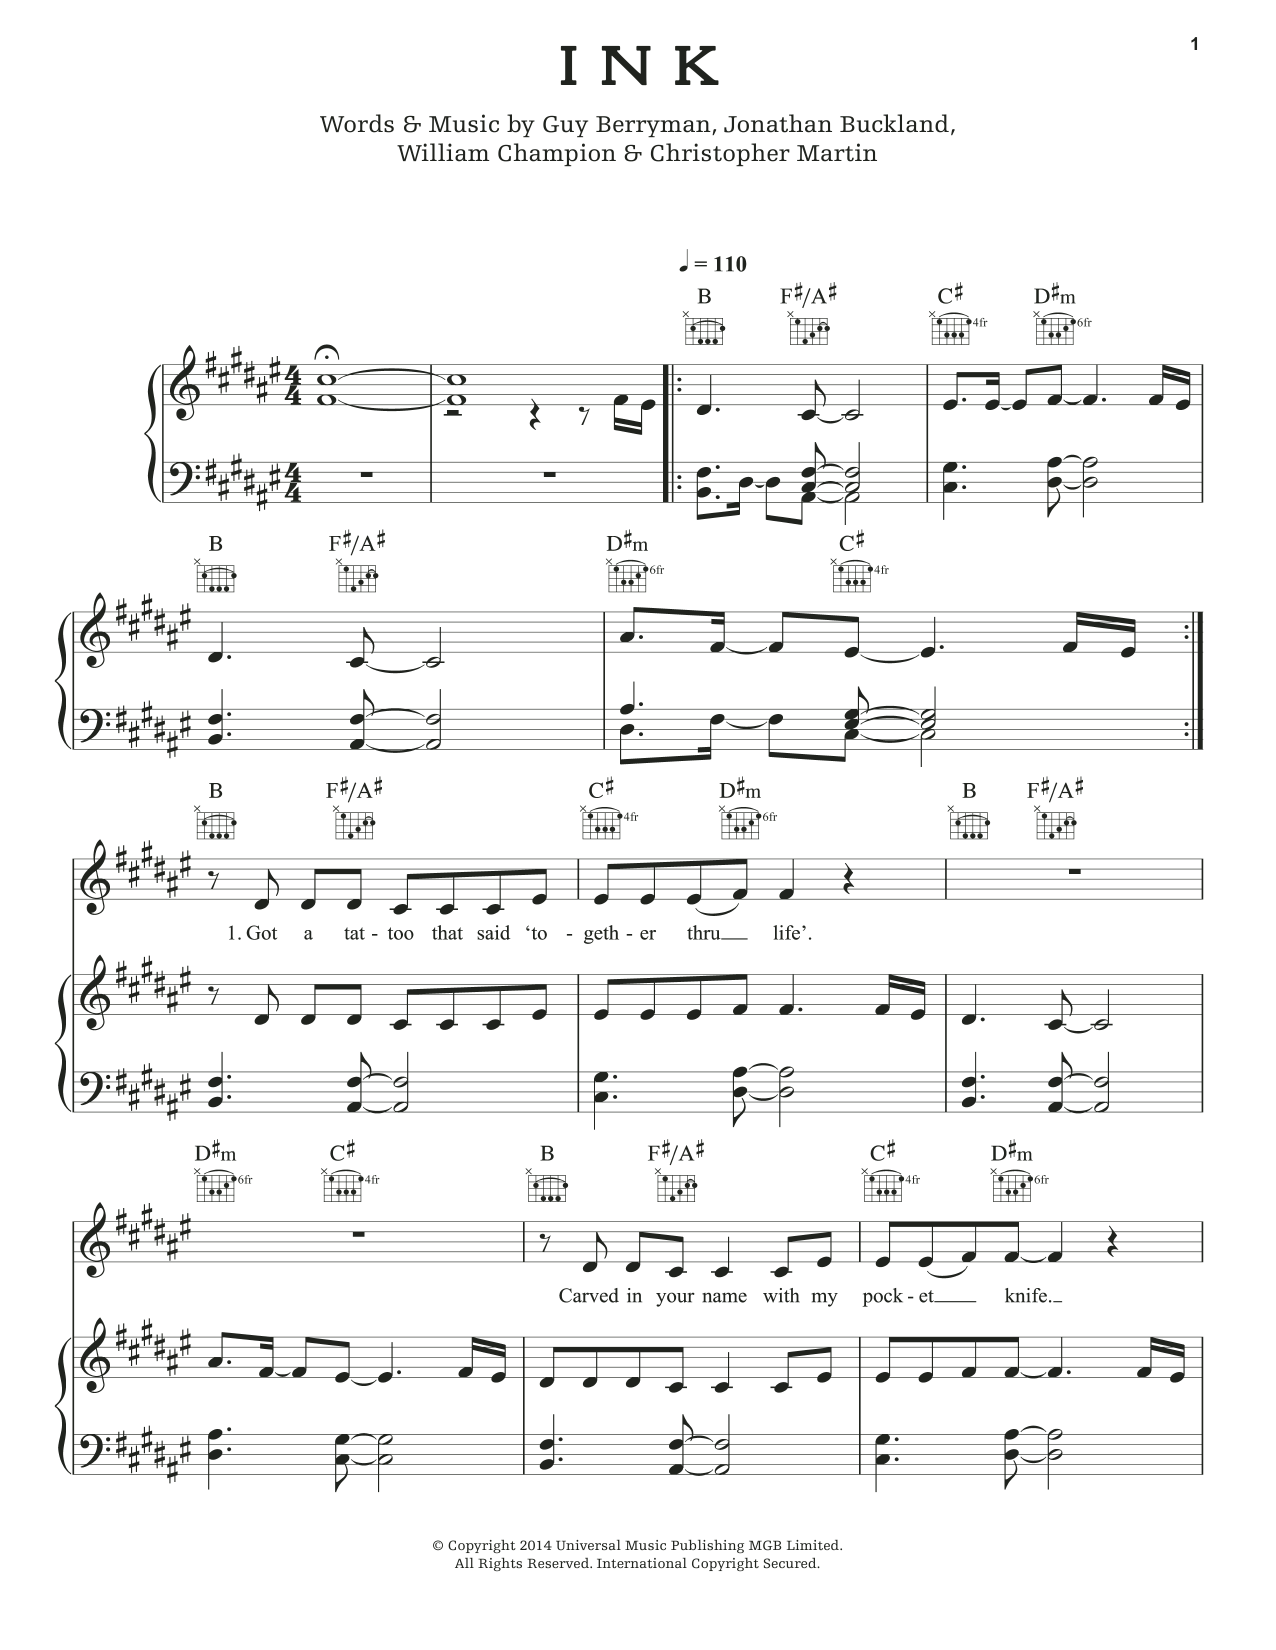 Download Coldplay Ink Sheet Music